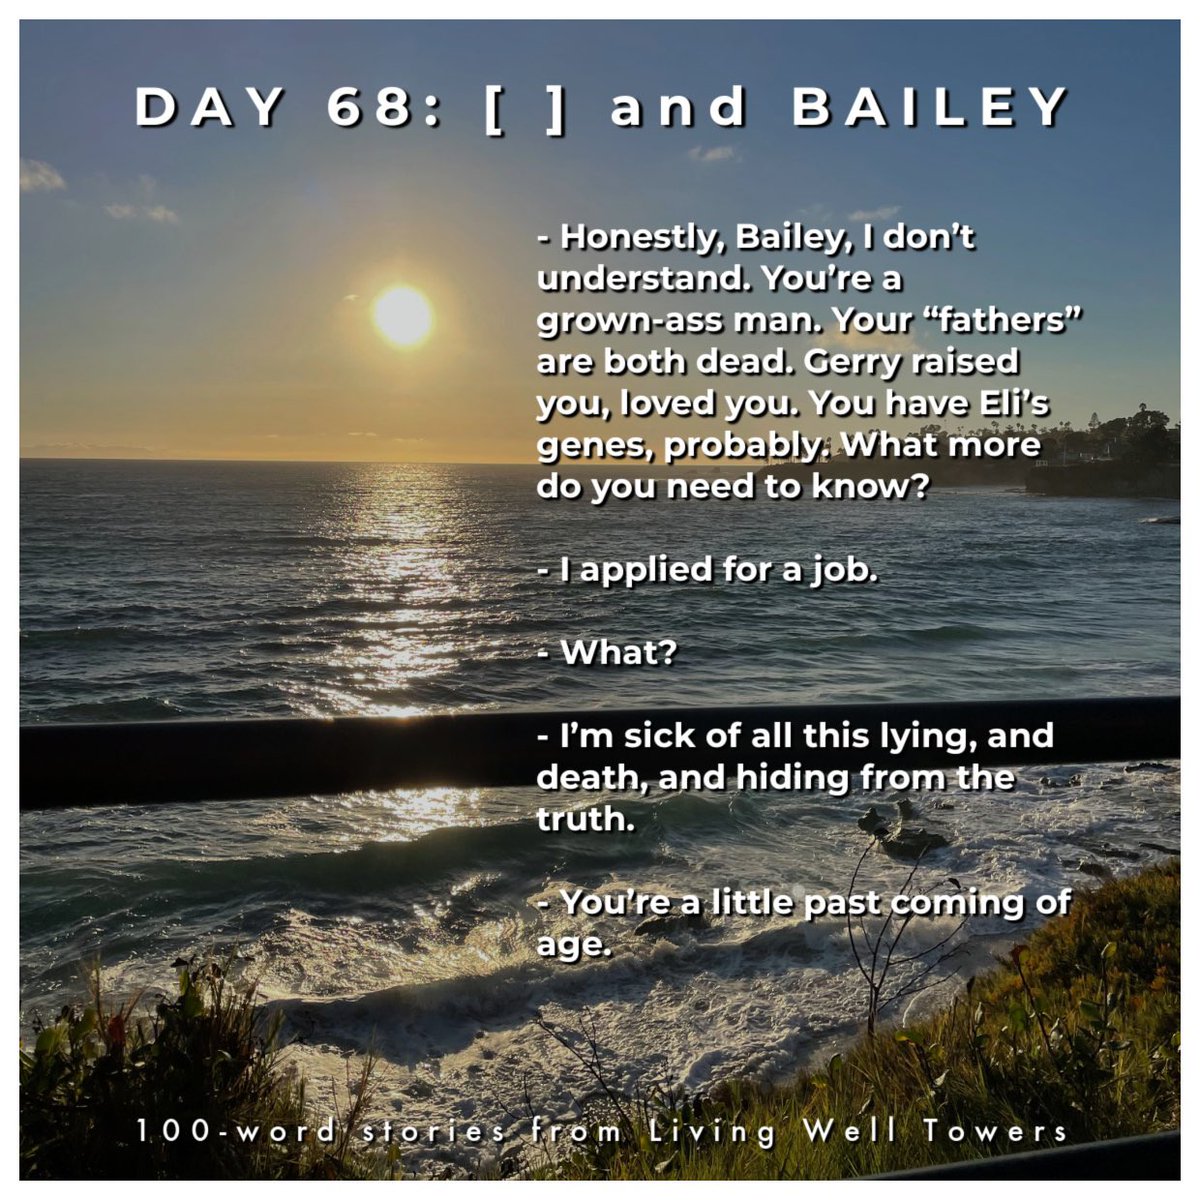 Bailey’s news comes out of nowhere. Where’s he going? What is he doing? Follow the #100wordstories #serial #amreading #amwriting on Patreon.com/TheStories839